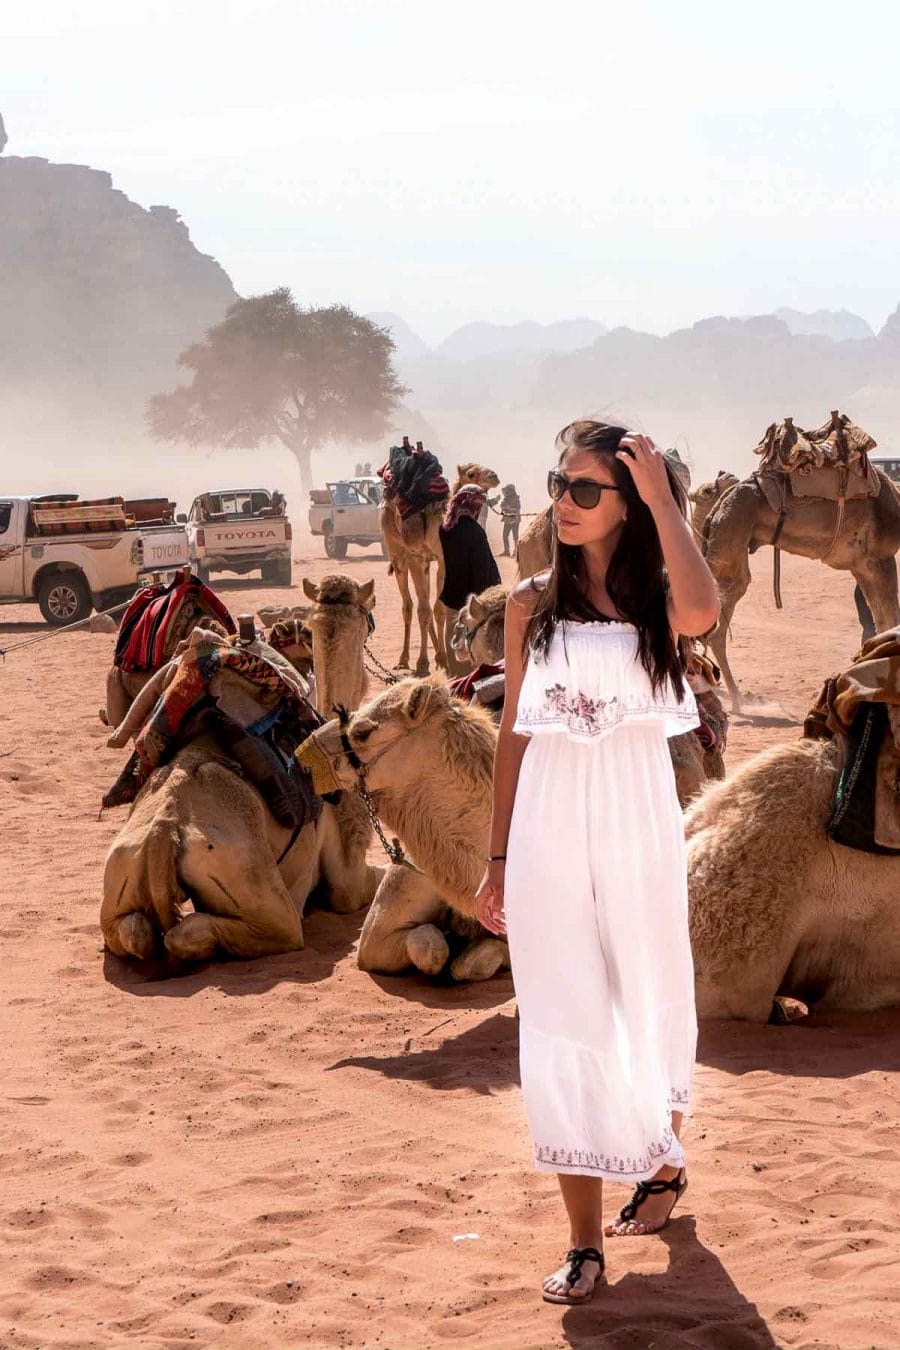 Girl in a white dress standing in front of the camels in the Wadi Rum, Jordan